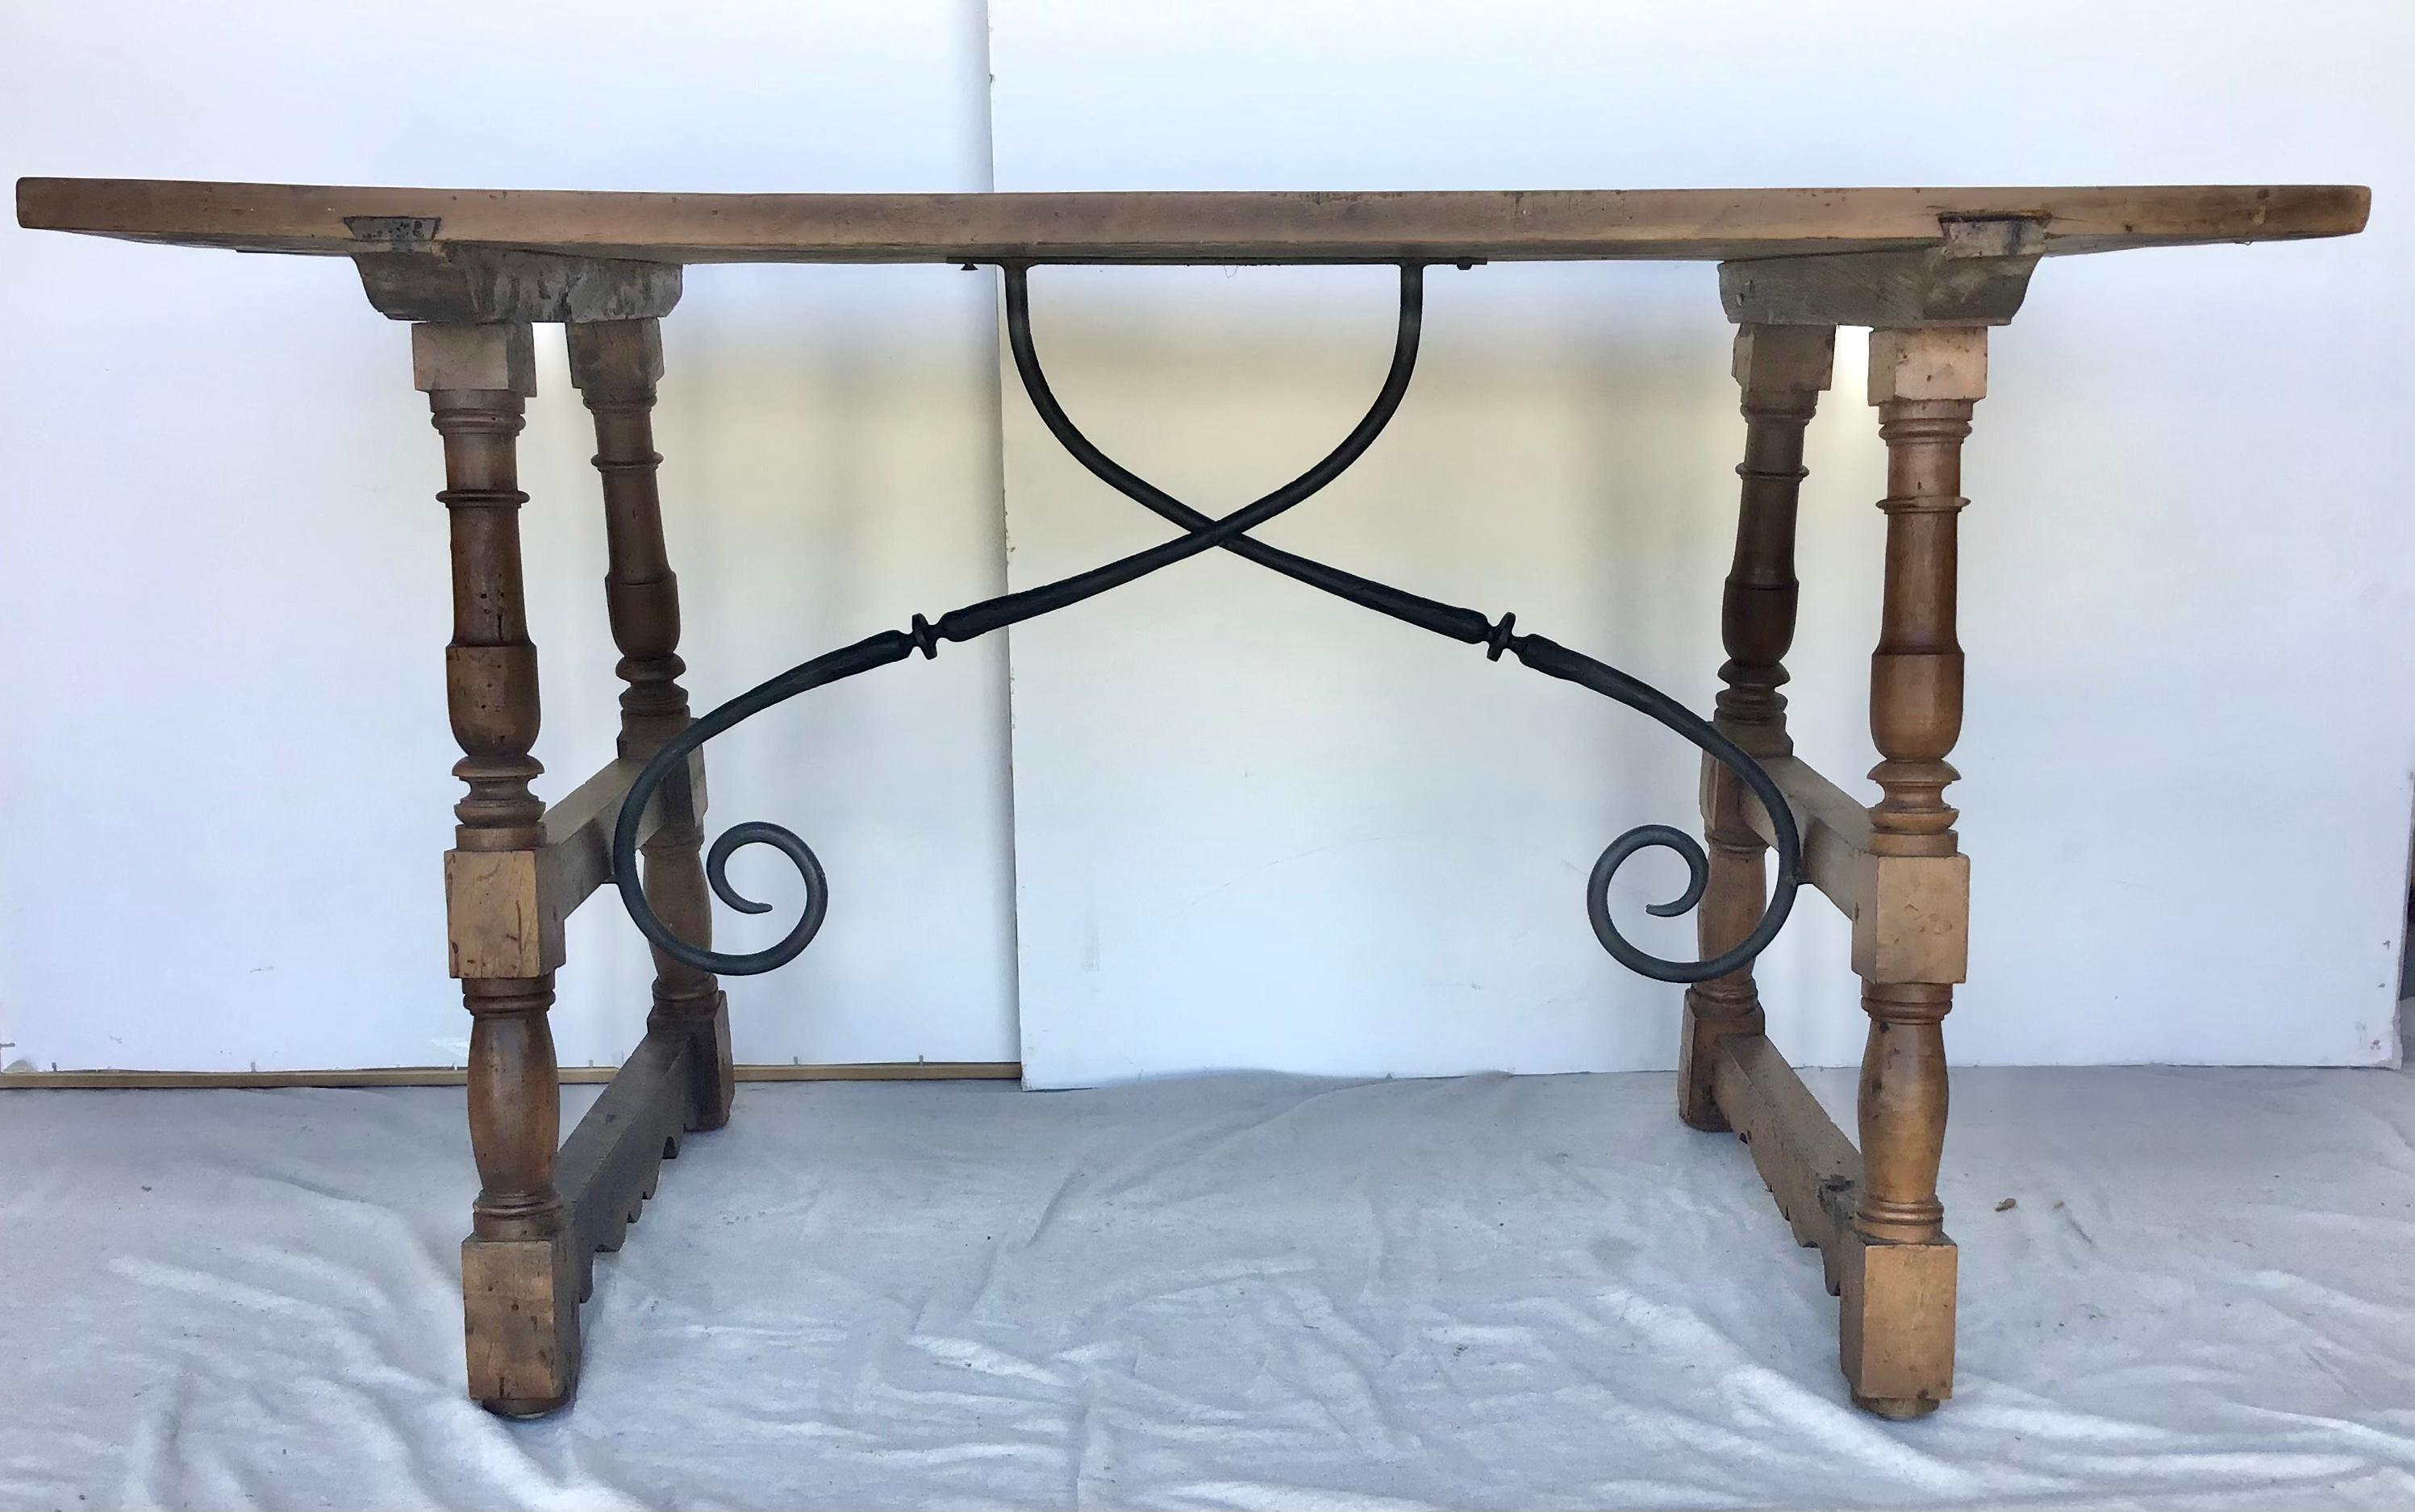 Italian, 18th century.walnut trestle or tavern table having a thick single board walnut top above turned legs with Iron stretcher. Perfect size to use as a writing table, sofa or center table.